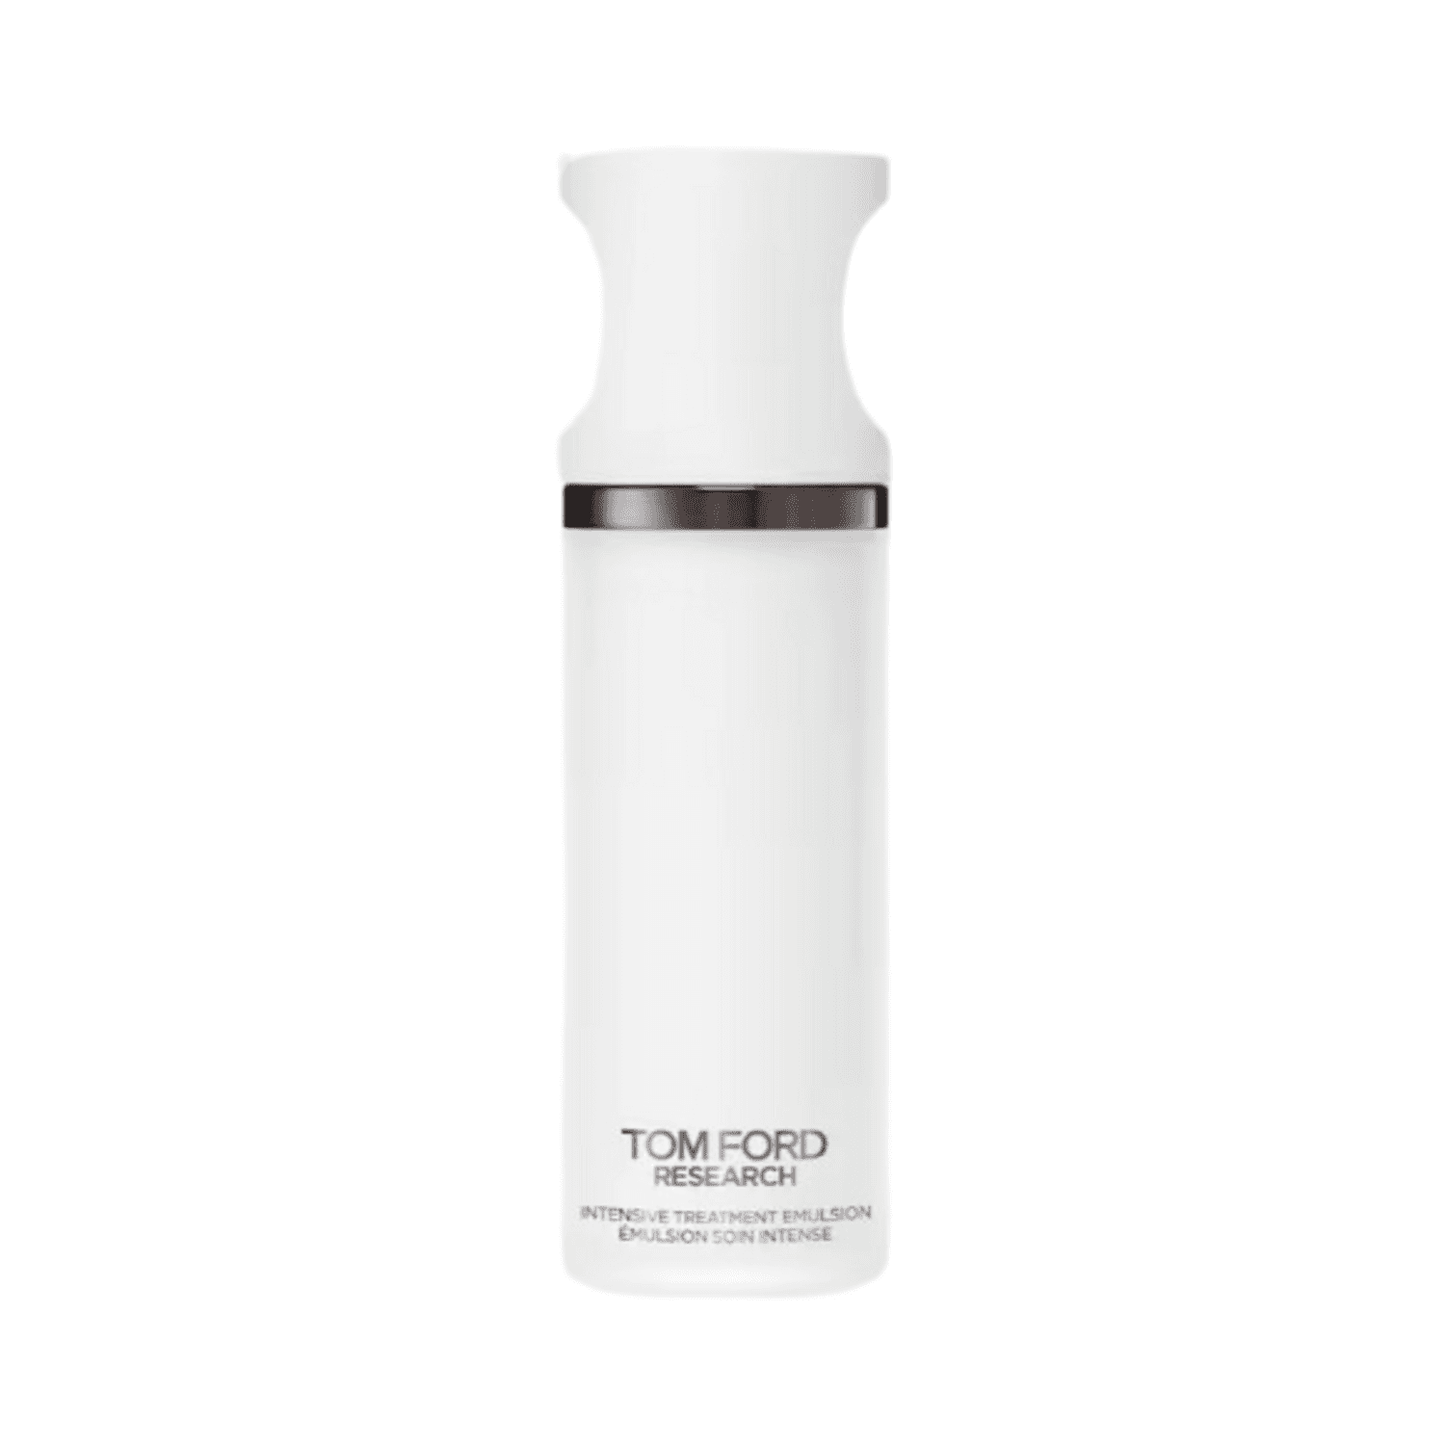 Tom Ford Research Intensitve Treatment Emulsion